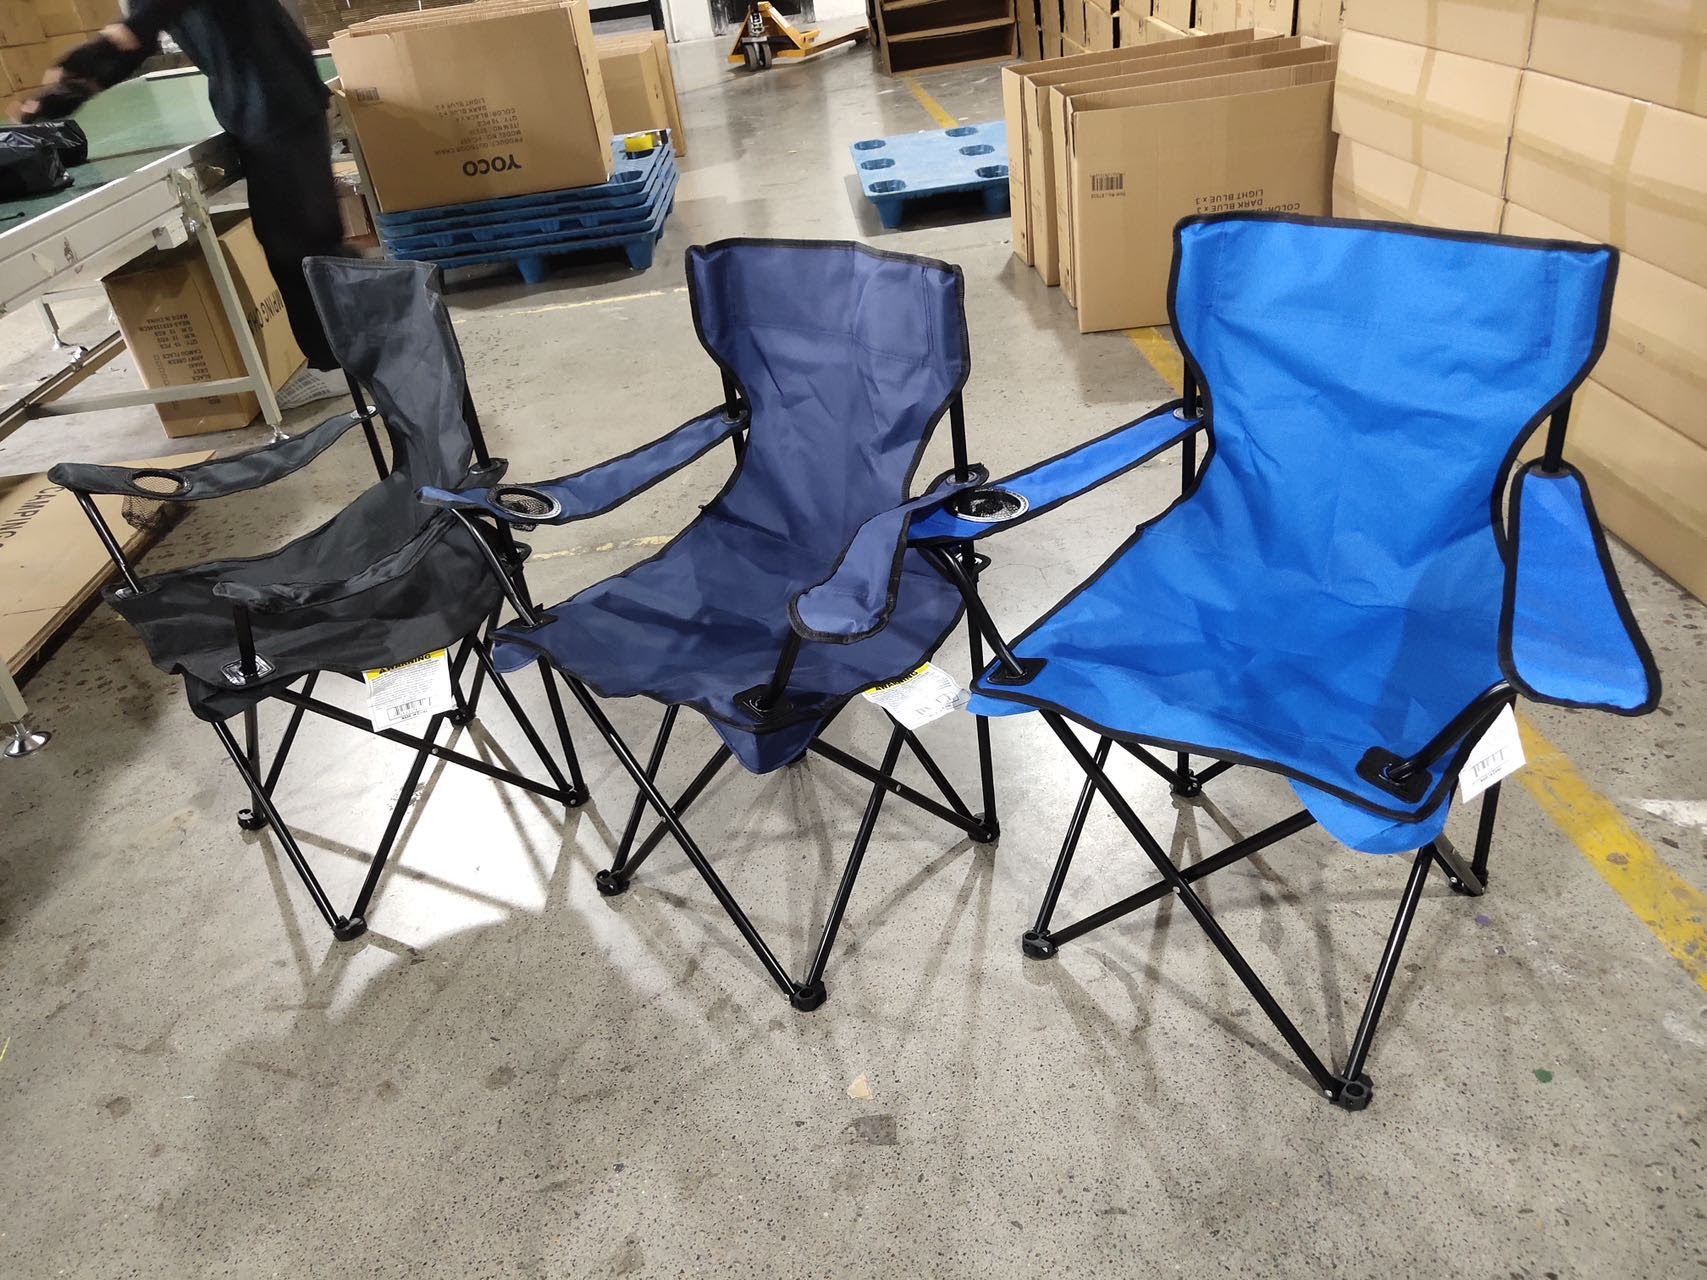 YOKO Durable Steel Frame with Built in Mesh Cup Holder Folding Chairs.